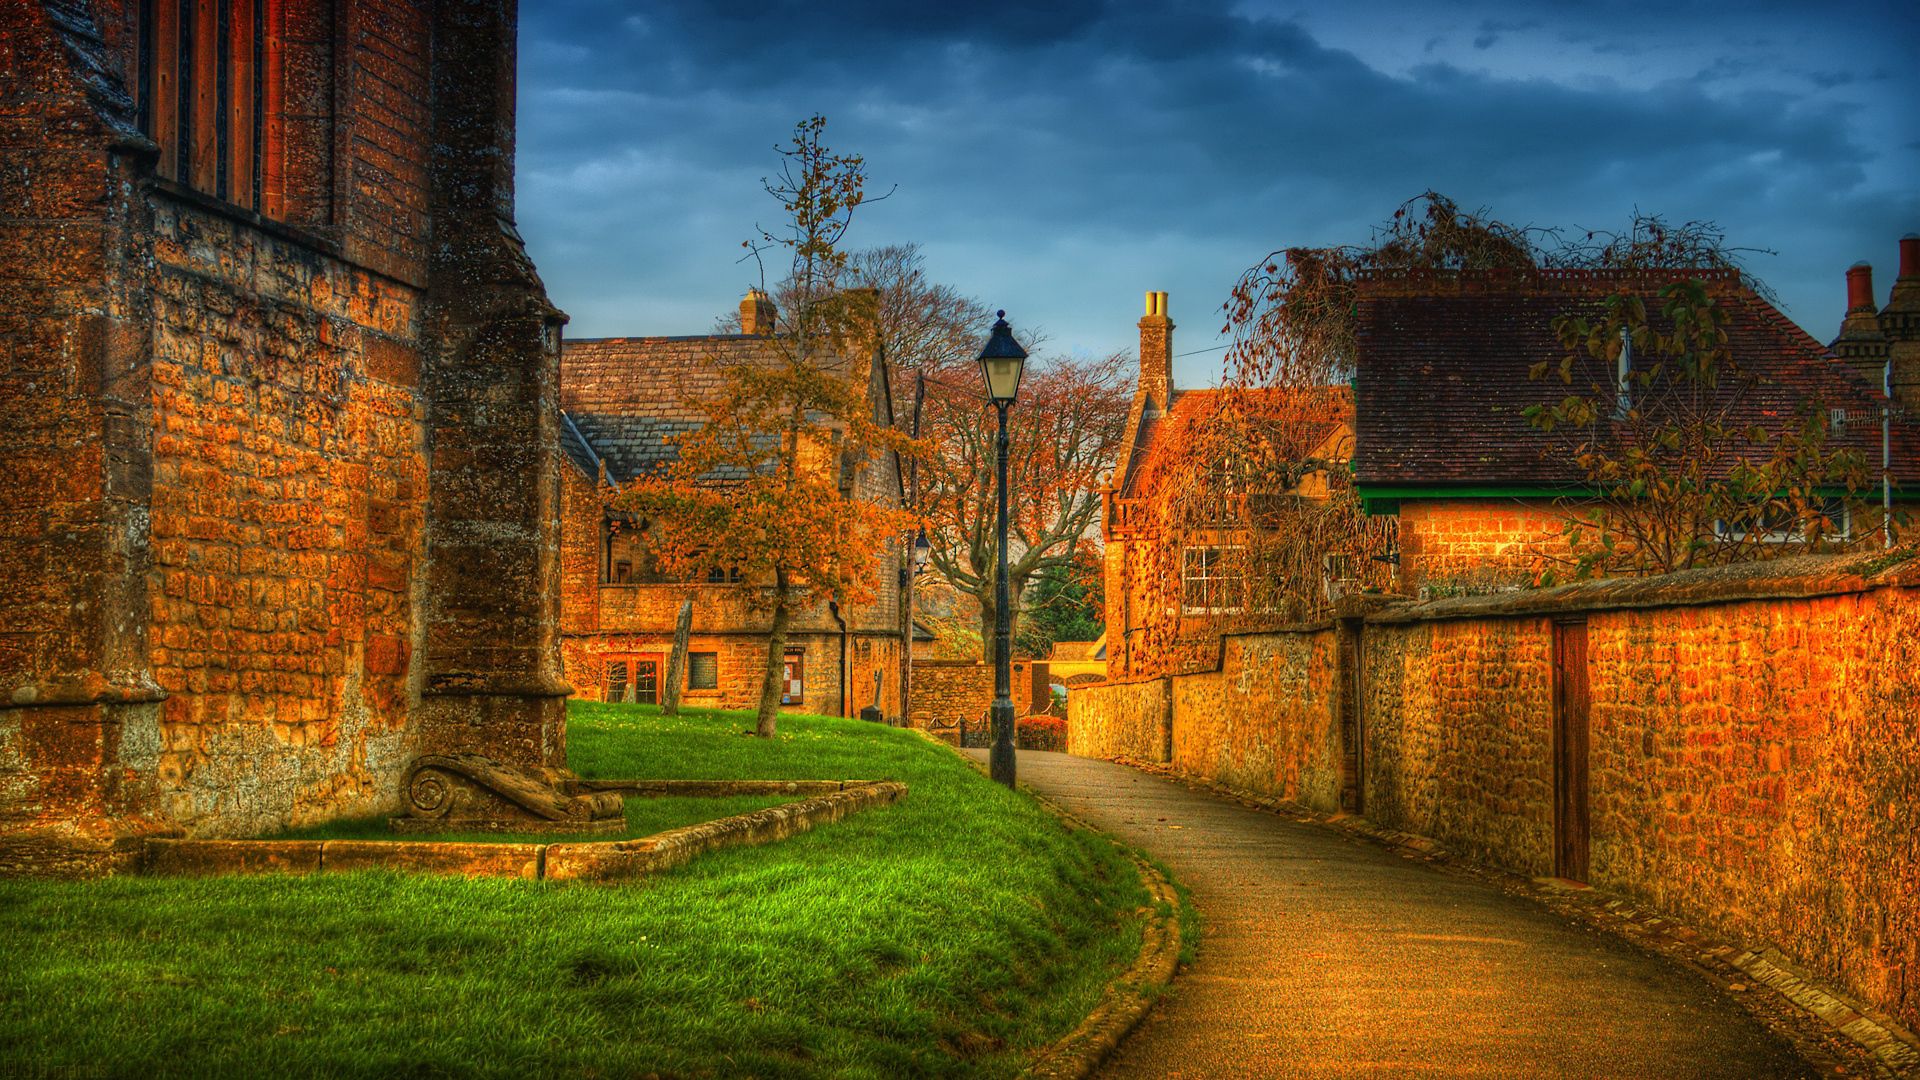 europe, hdr, park, cities, walls